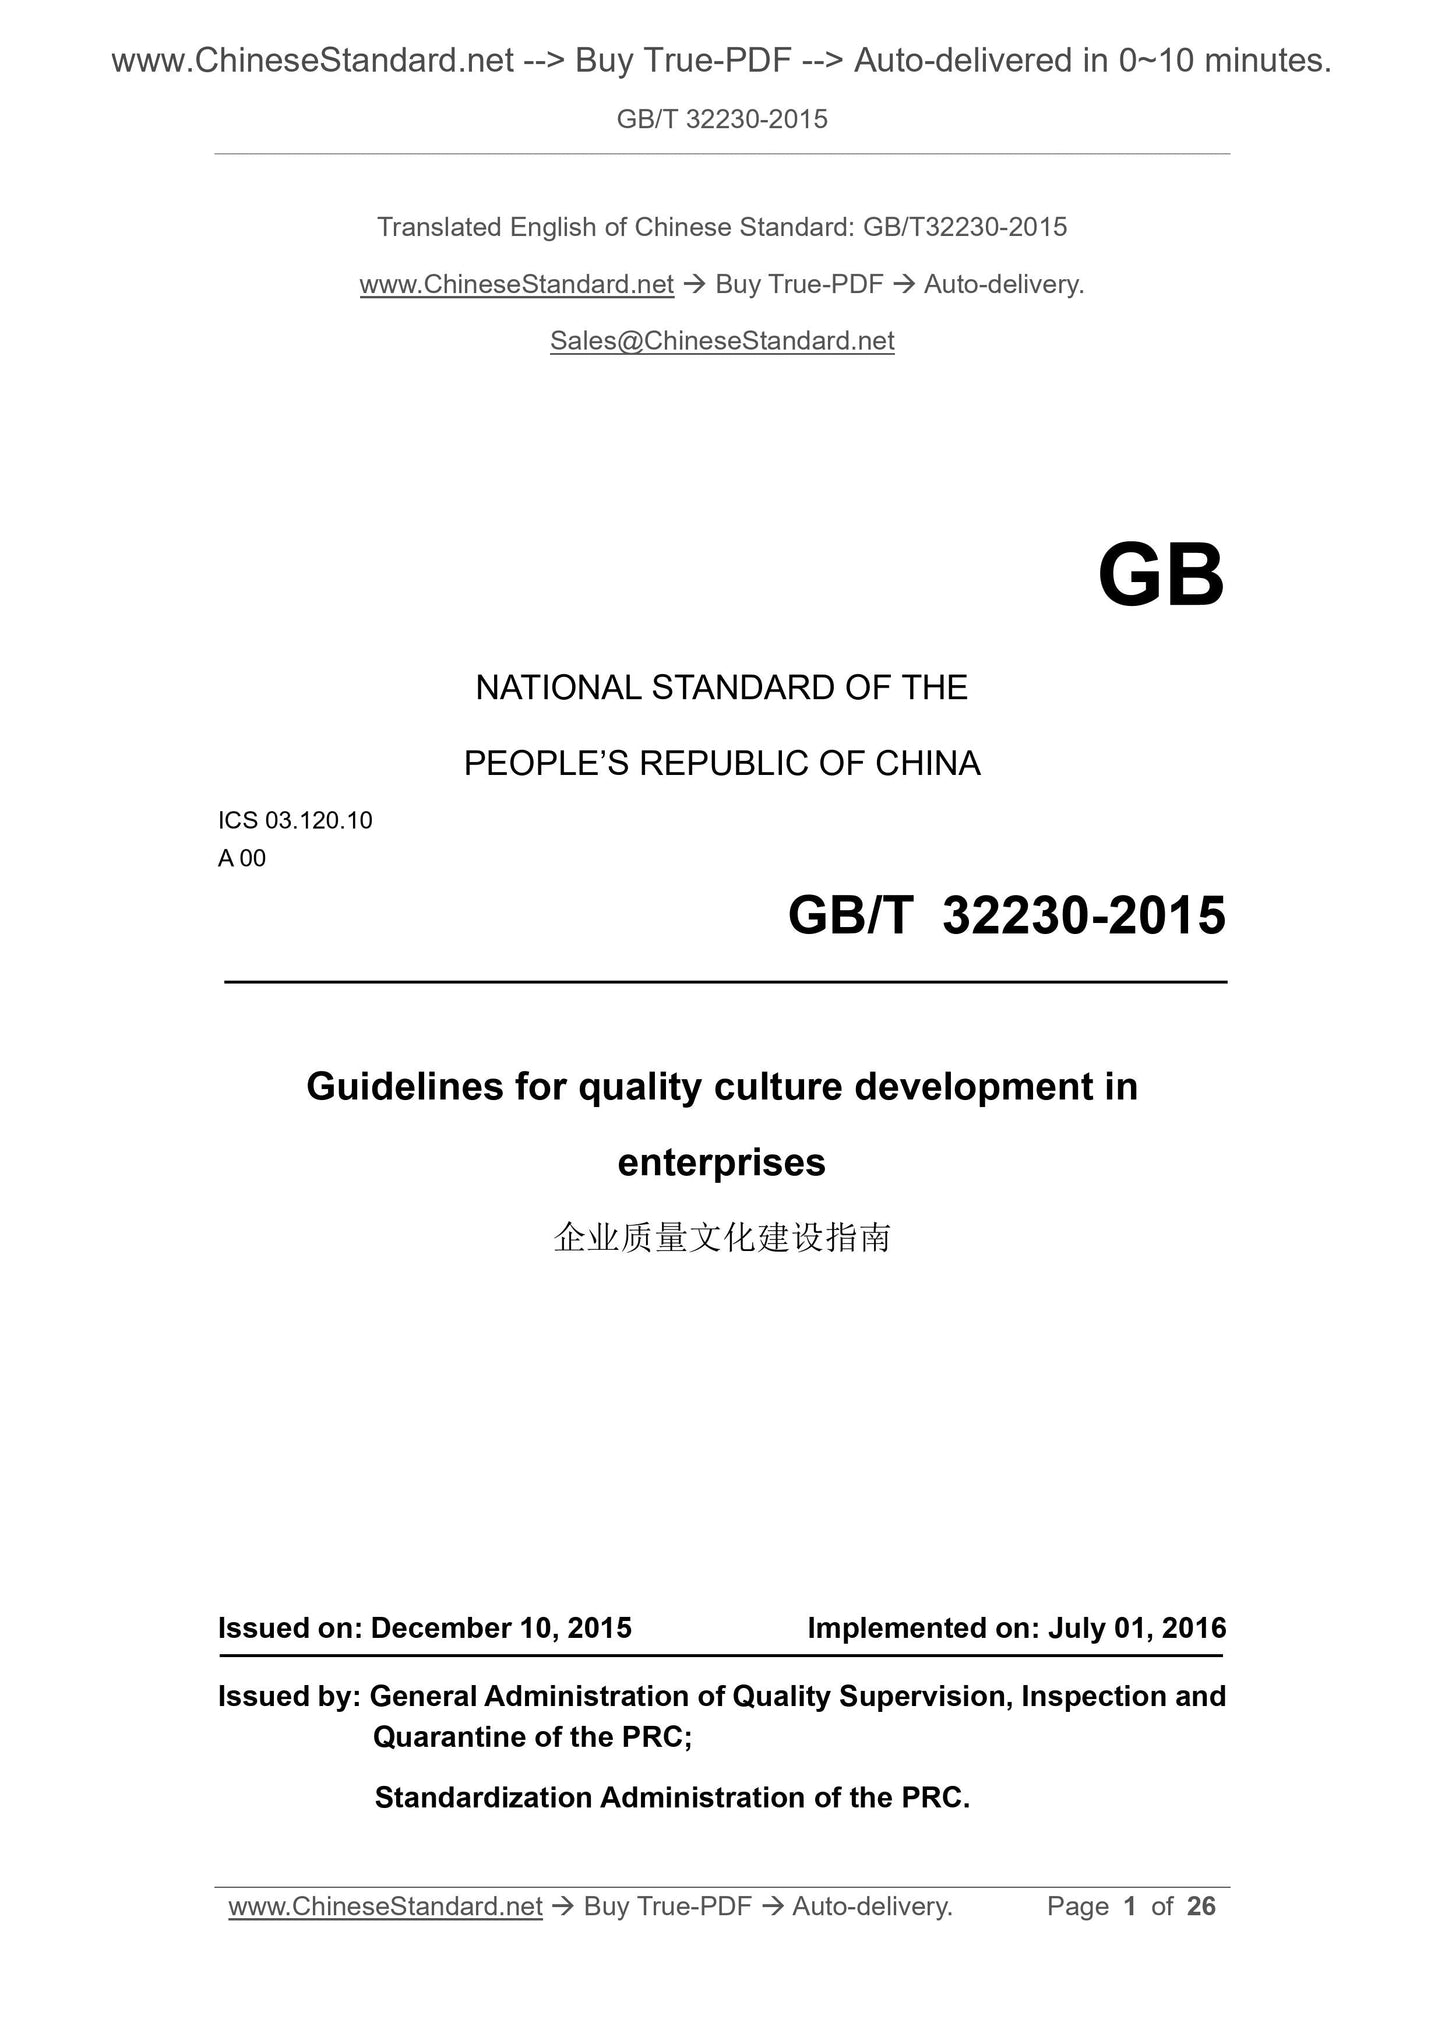 GB/T 32230-2015 Page 1